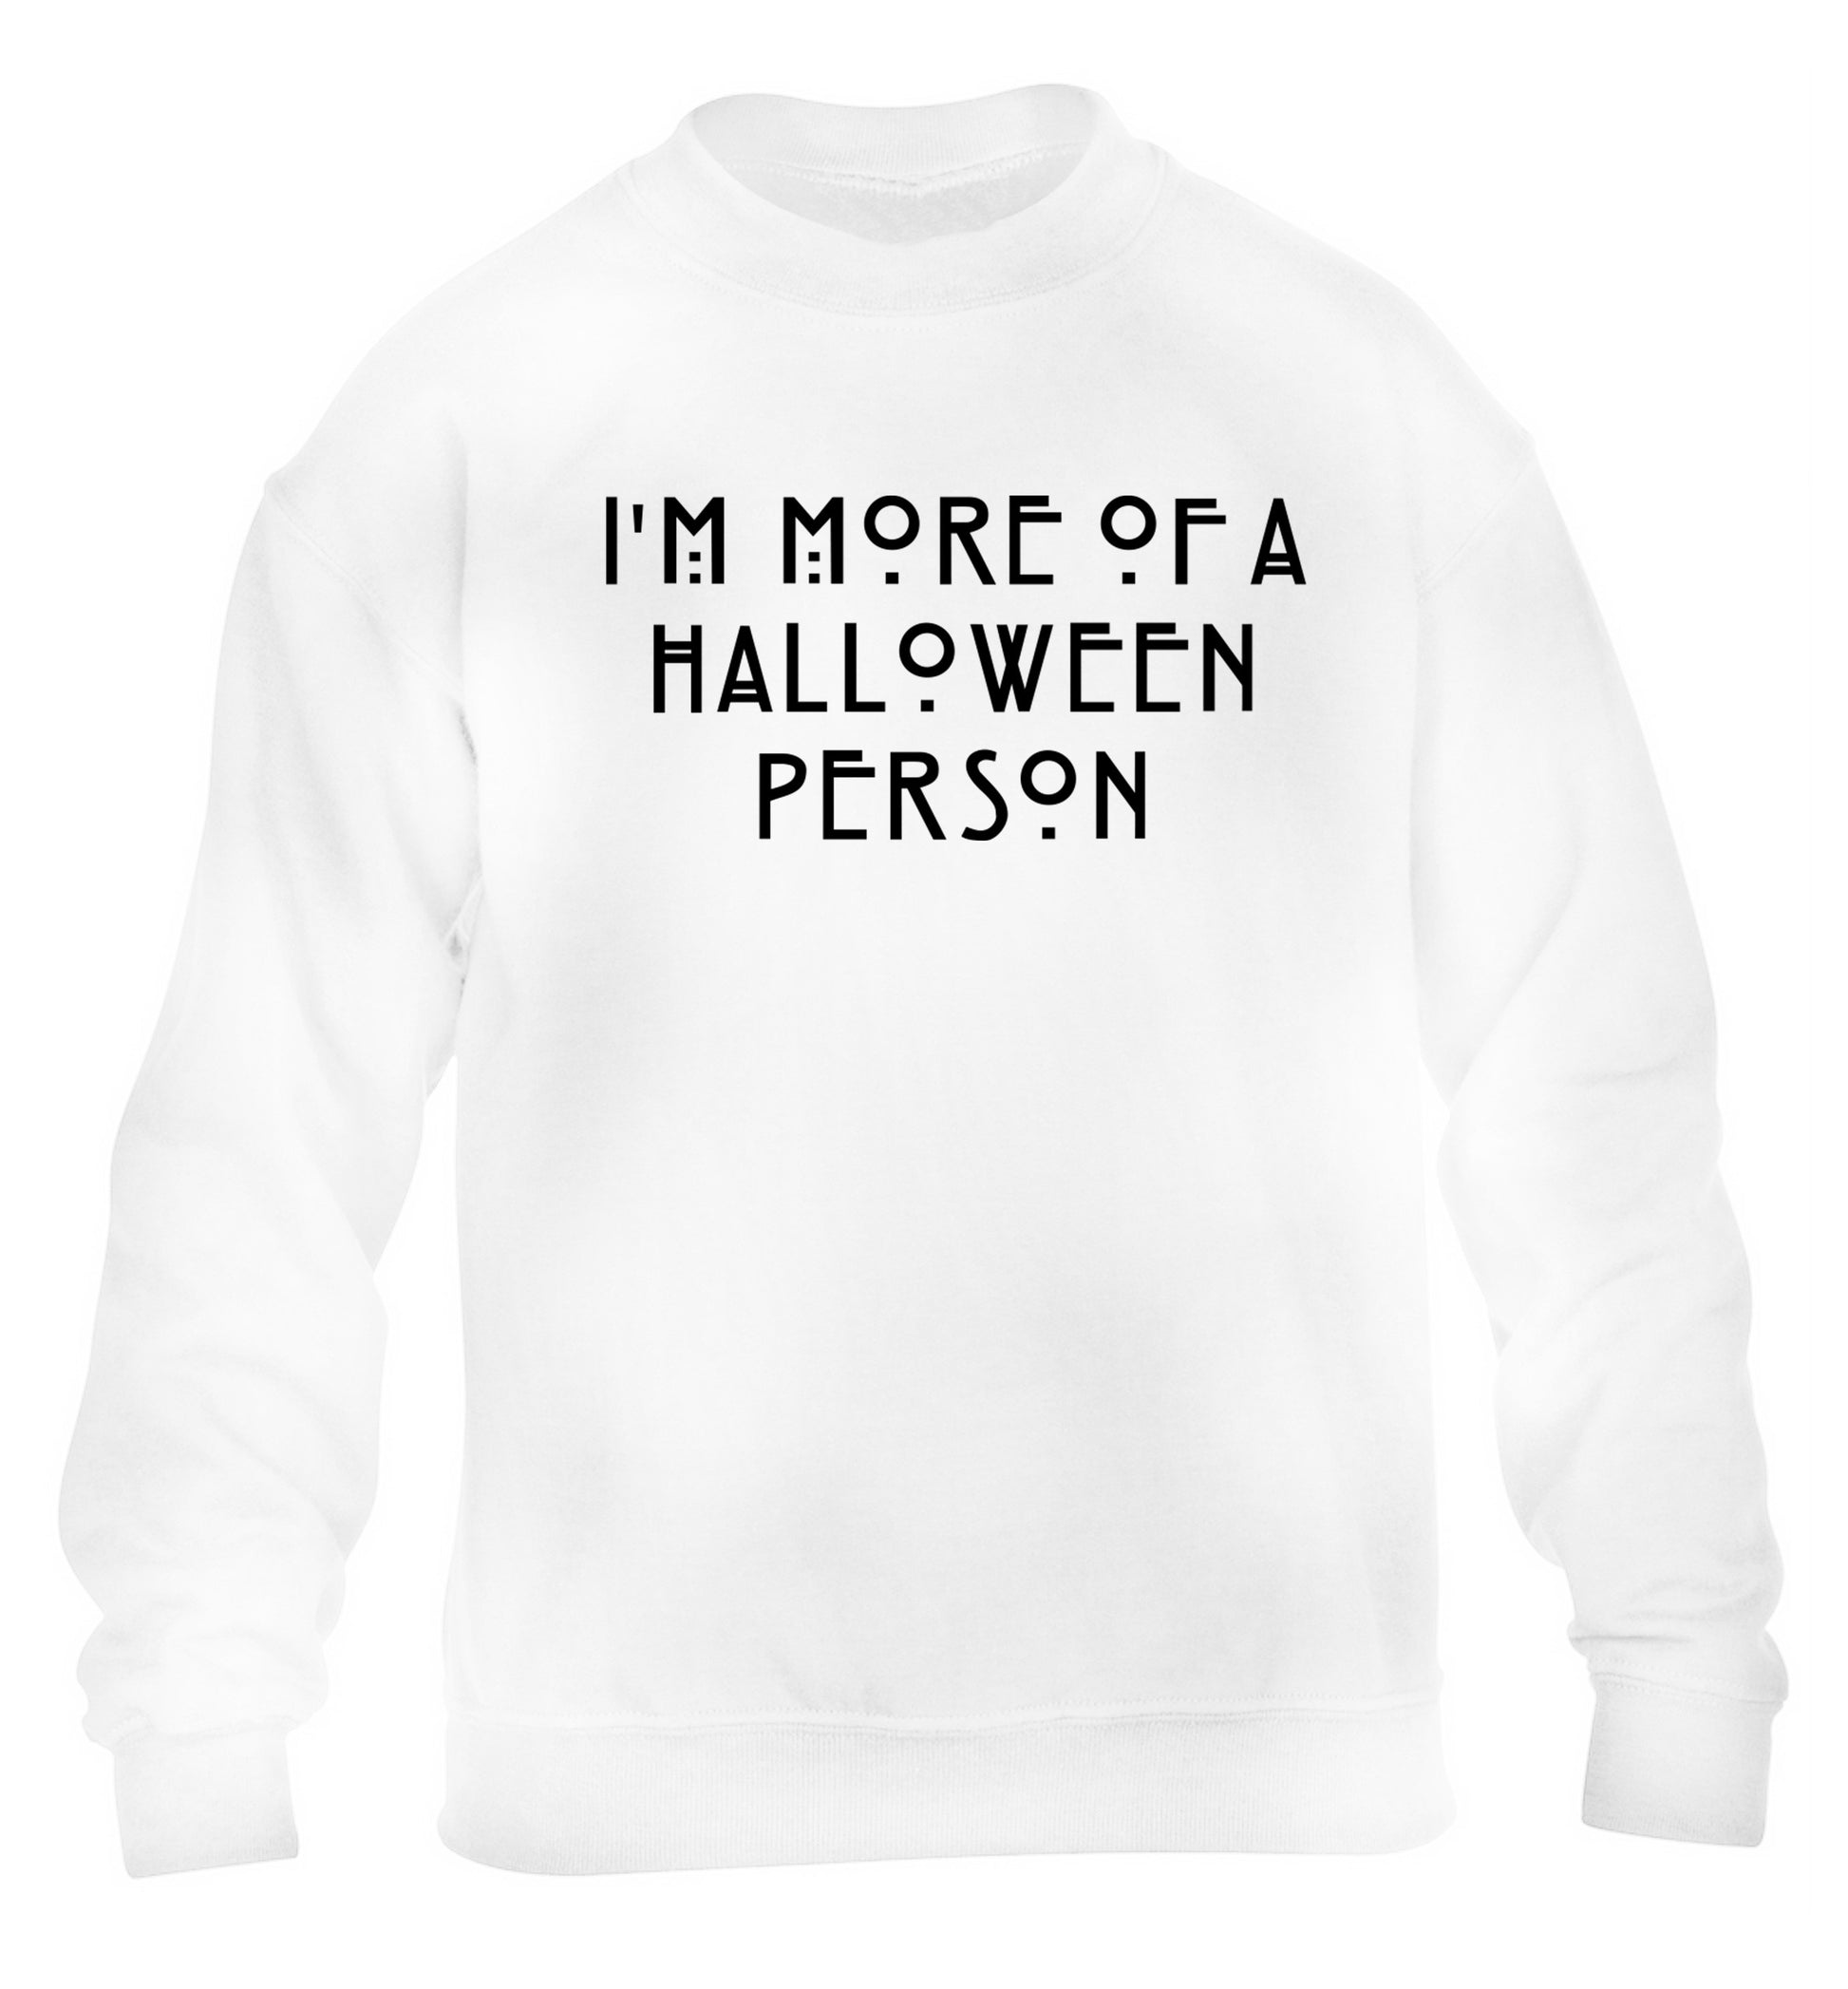 I'm more of a halloween person children's white sweater 12-14 Years